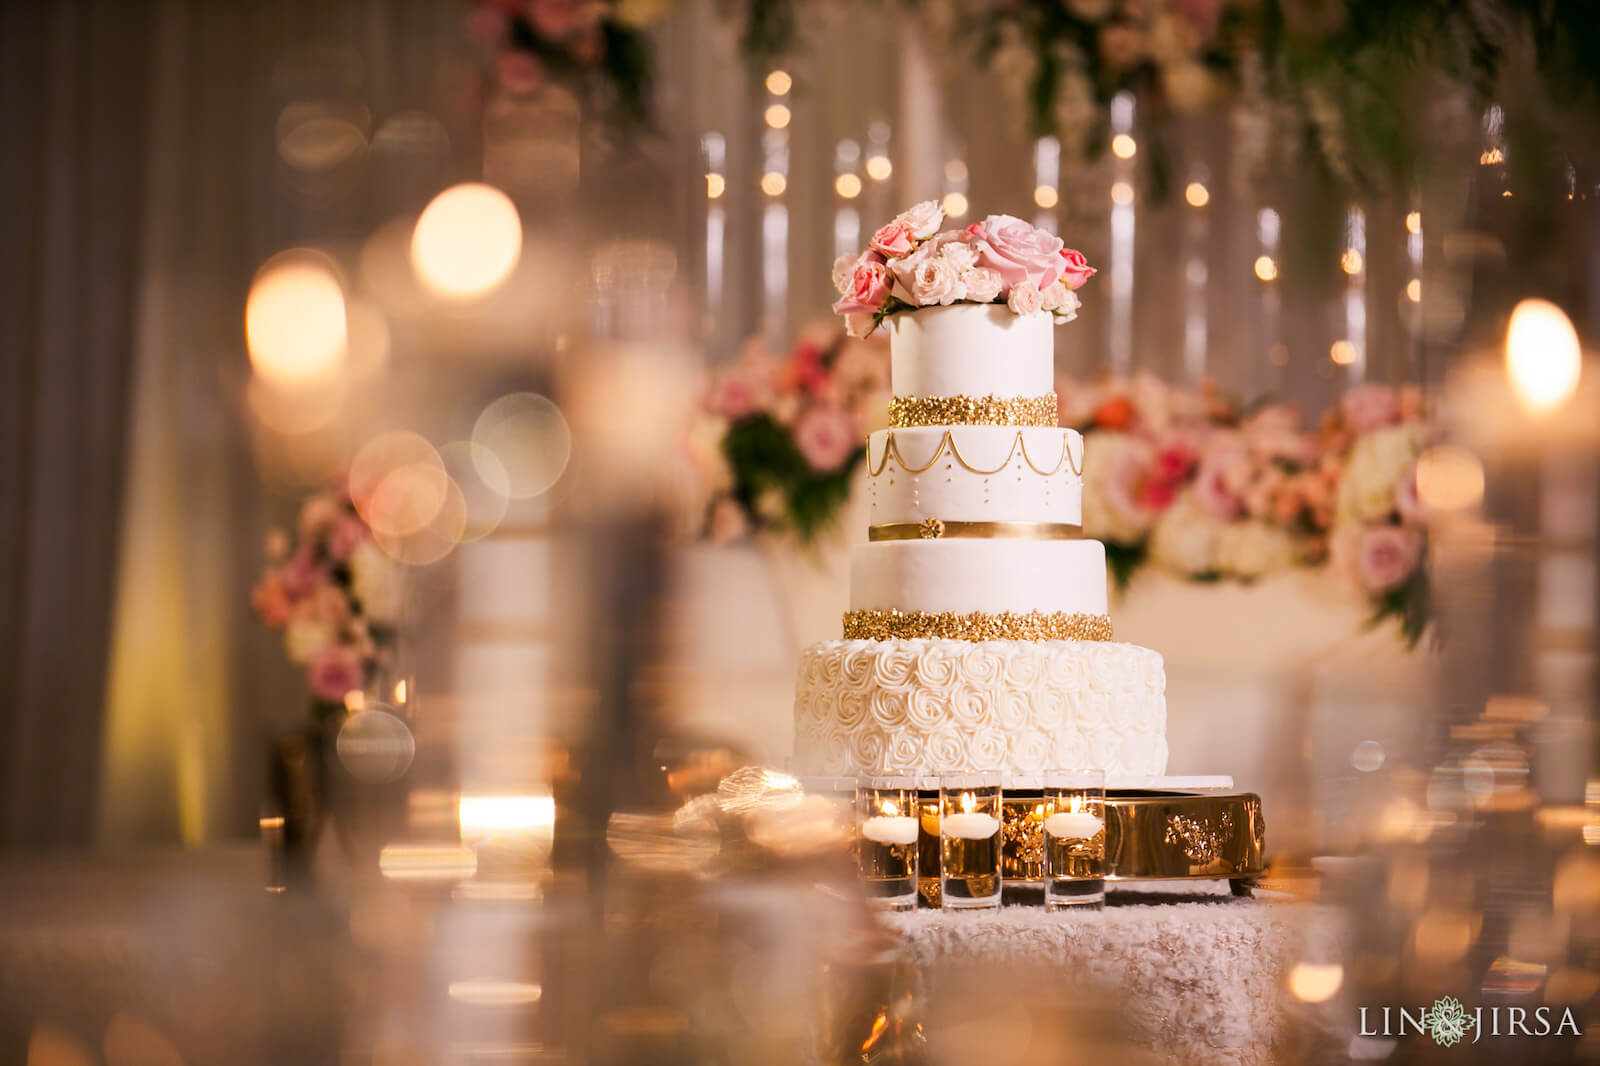 Wedding Cake Pictures and Tips - The Photo Argus